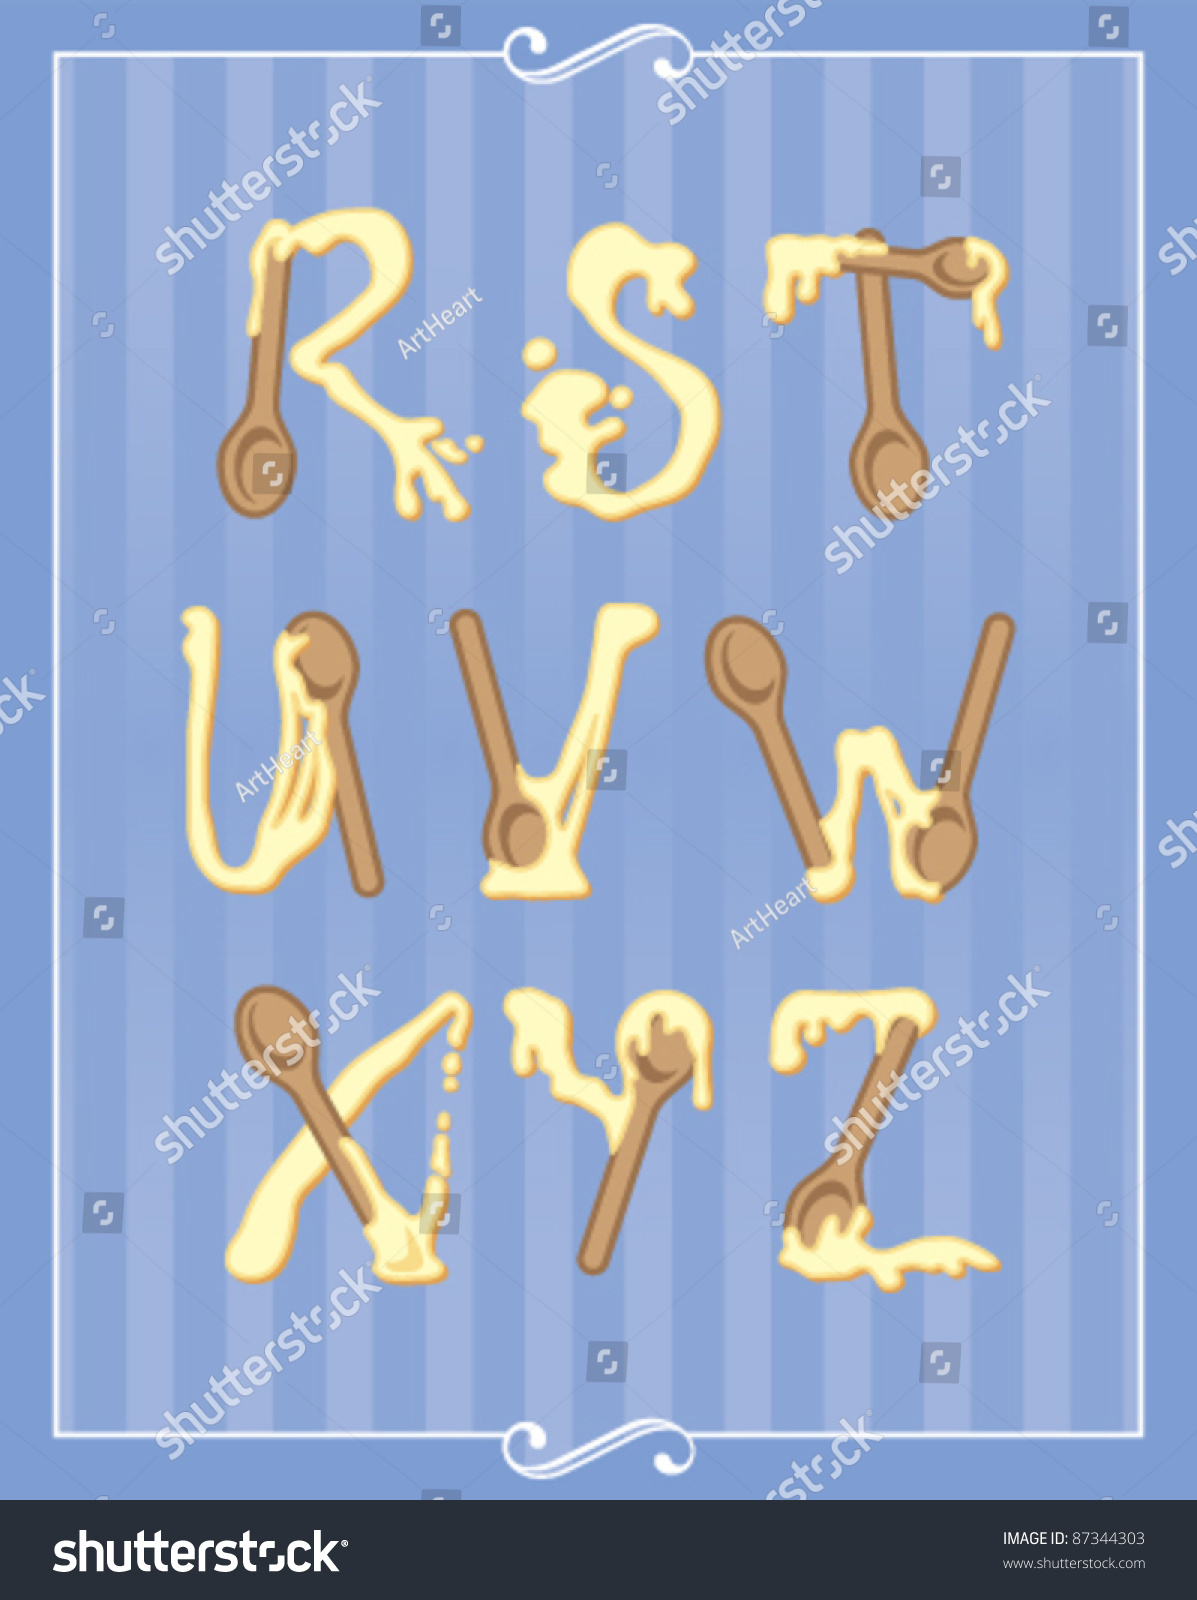 SVG of Baking Alphabet of spoons mixing sticky batter or dough, part 1 of 3 (a - i) svg